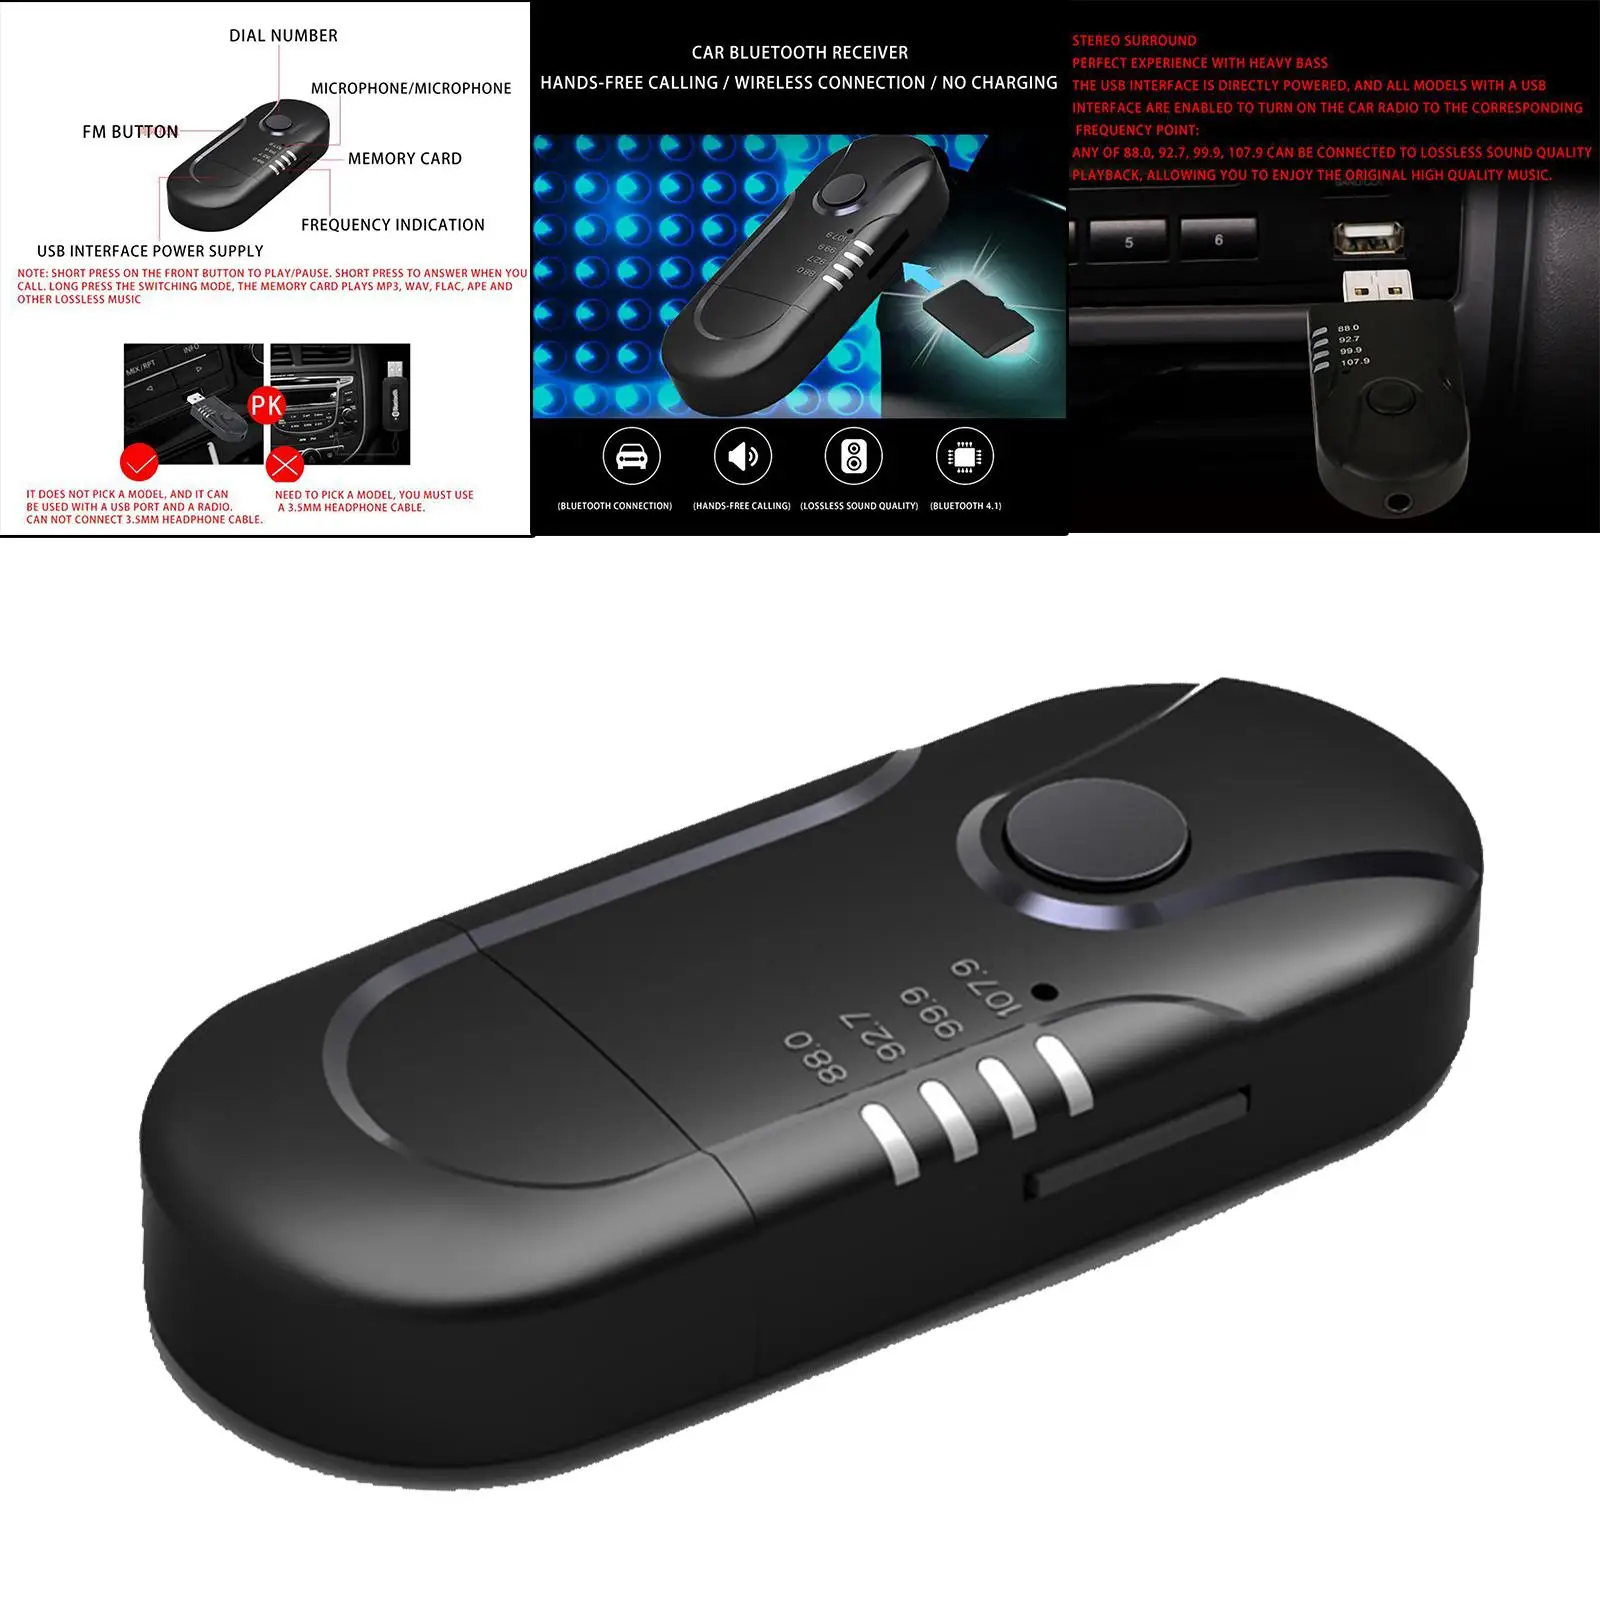 USB Bluetooth Adapter Stereo Bluetooth 5.0 Portable 3 in 1 Music Player FM Transmitter Receiver for AUX Headphones TV Laptop Car